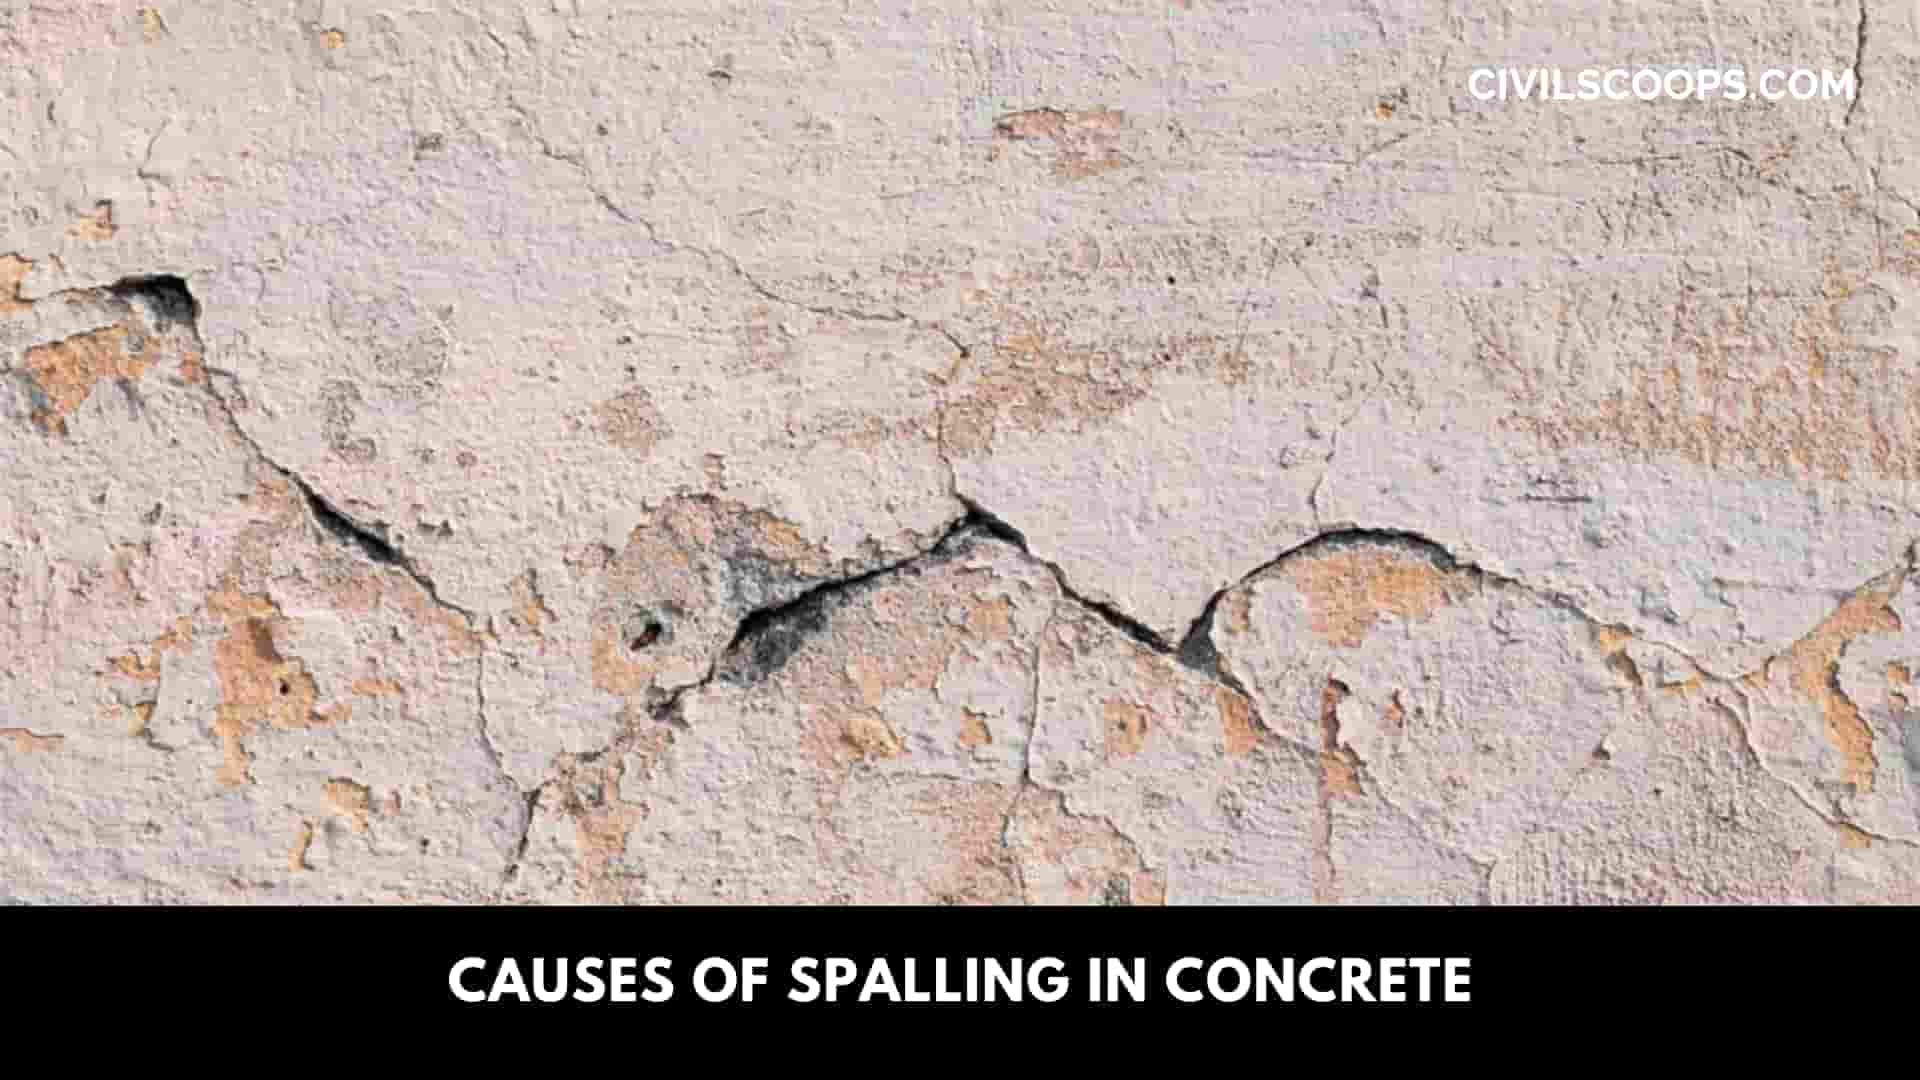 Causes of Spalling in Concrete